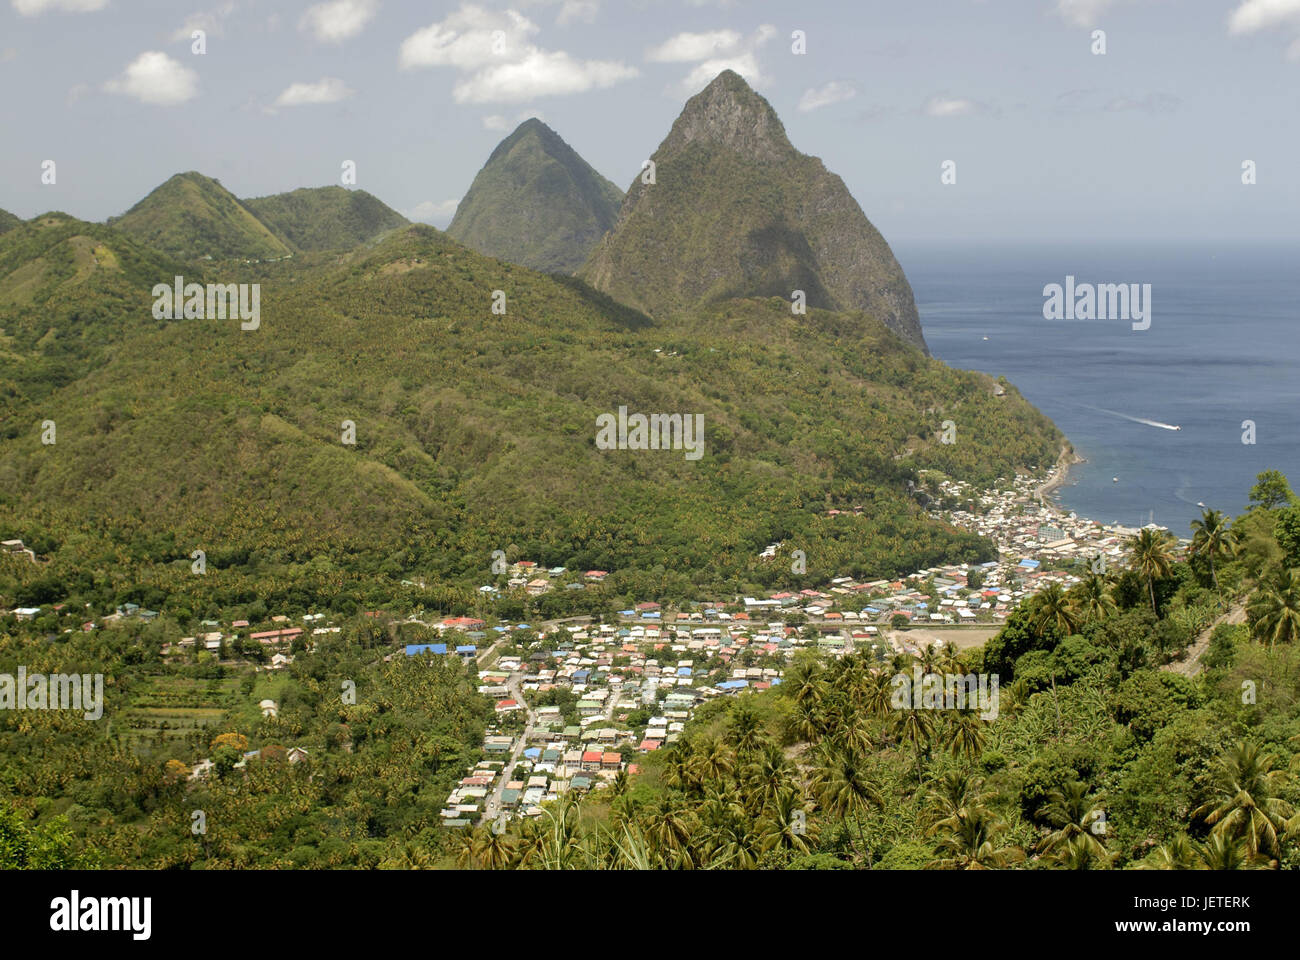 The small Antilles, Saint Lucia, Soufriere, local overview, coast, mountains, Pitons, the Caribbean, island, Caribbean island, place, houses, residential houses, mountains, mountain cones, strikingly, rising, environment, tropical, rainforest, Stock Photo